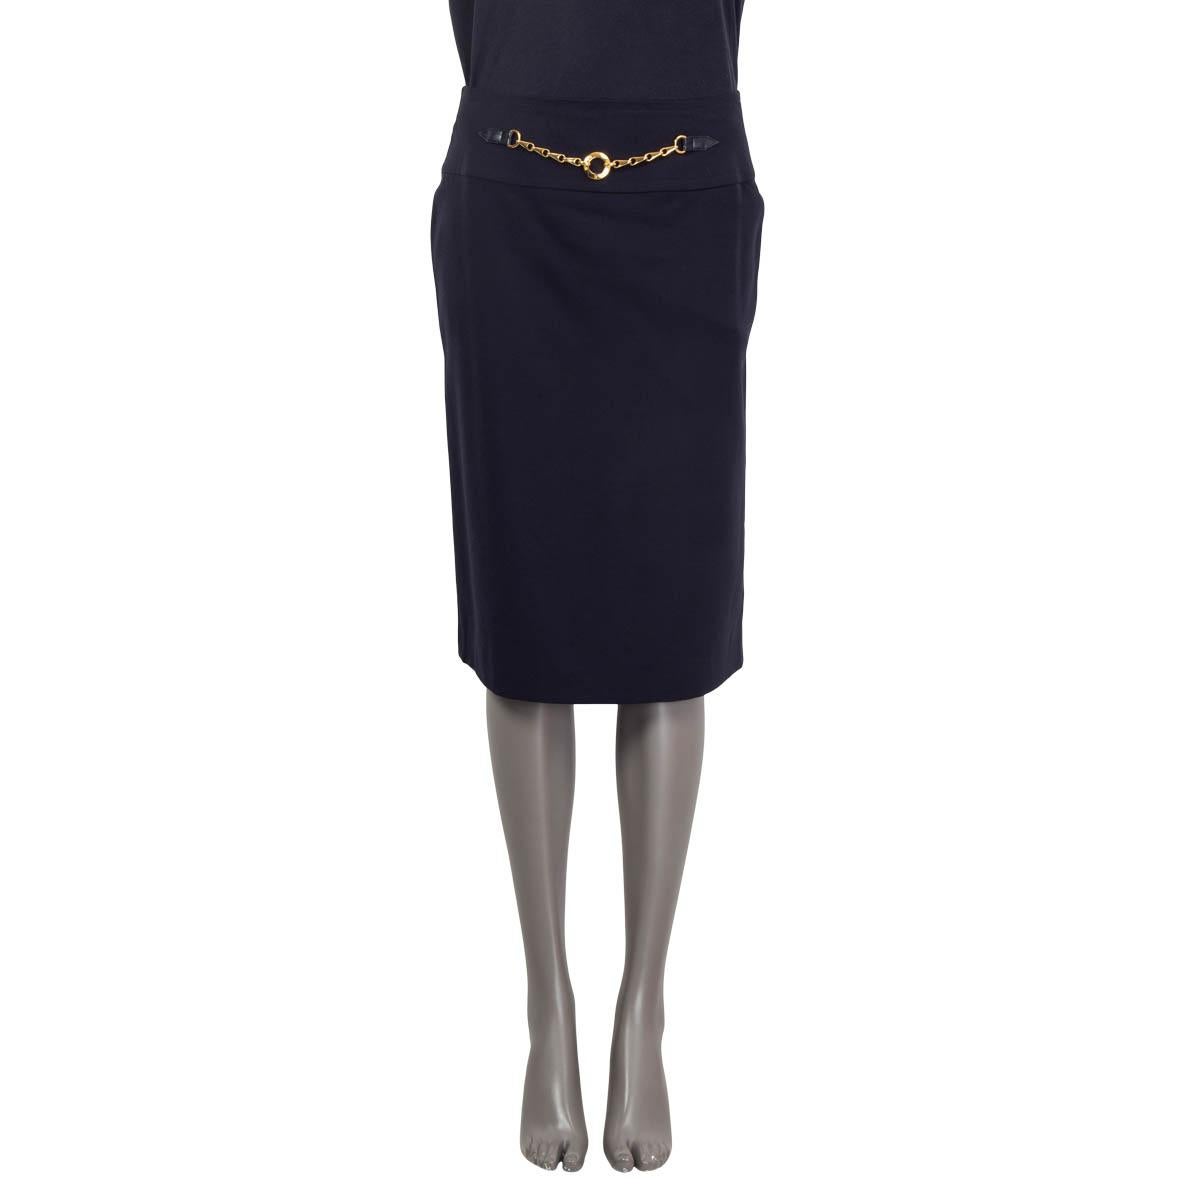 100% authentic Cline vintage skirt in midnight blue wool (100%). Features a gold 'Celine' chain on the front and opens with a concealed zipper on the back. Lined in midnight blue. Has some permanent iron creases on the front otherwise in excellent